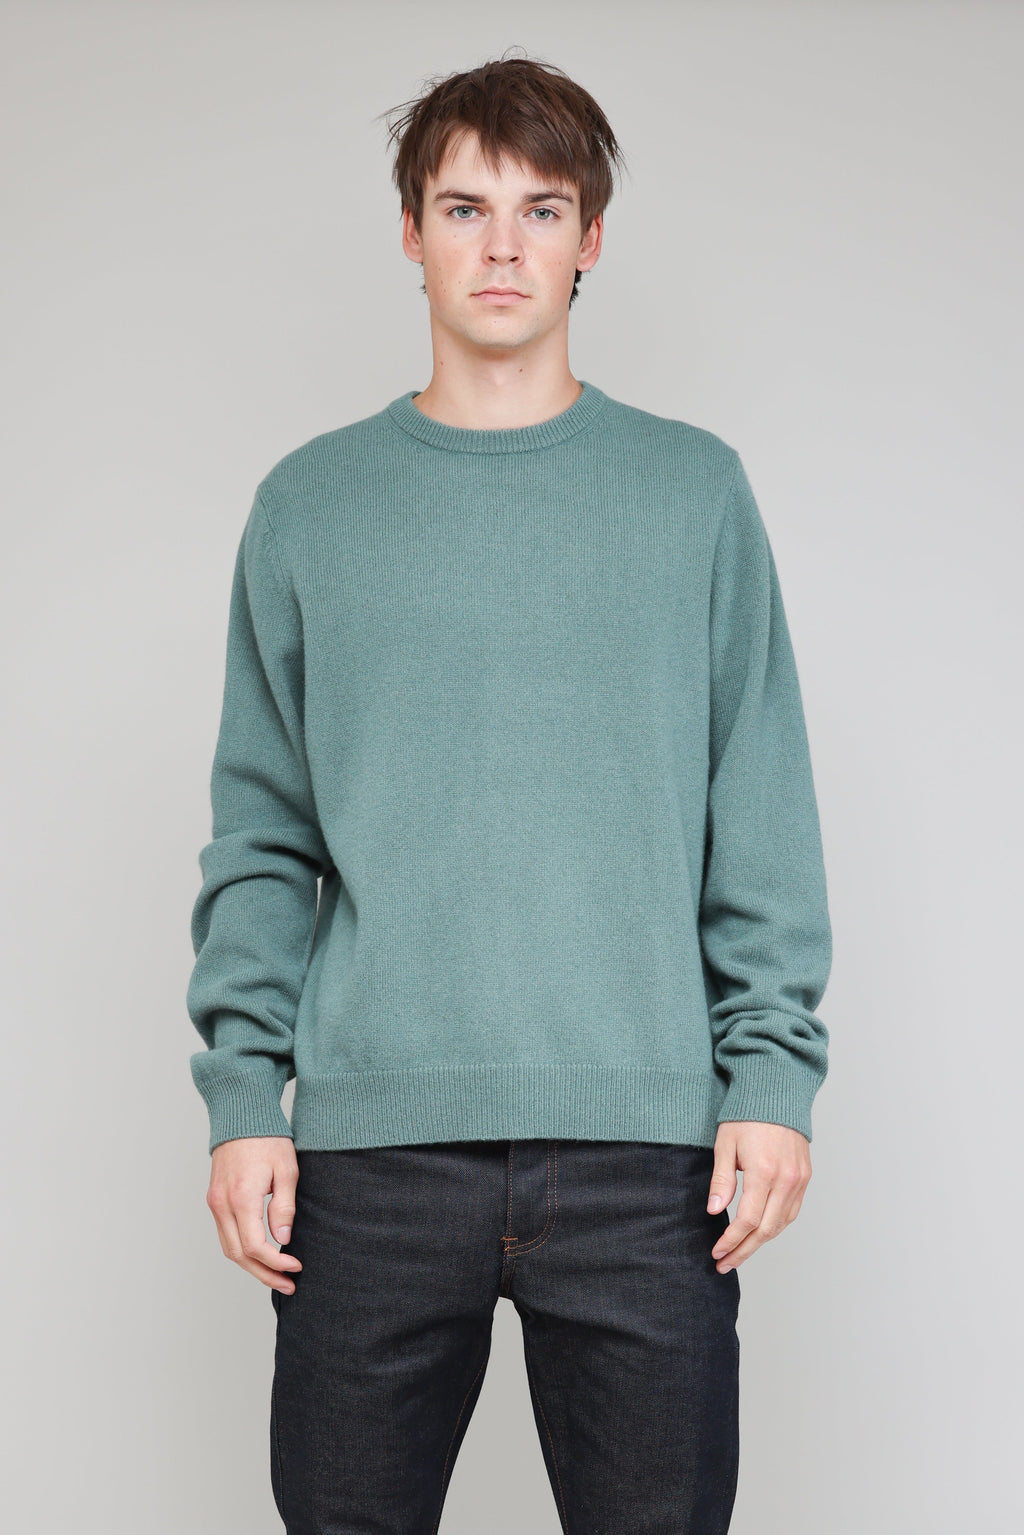 New Wool Crew in Pine 01